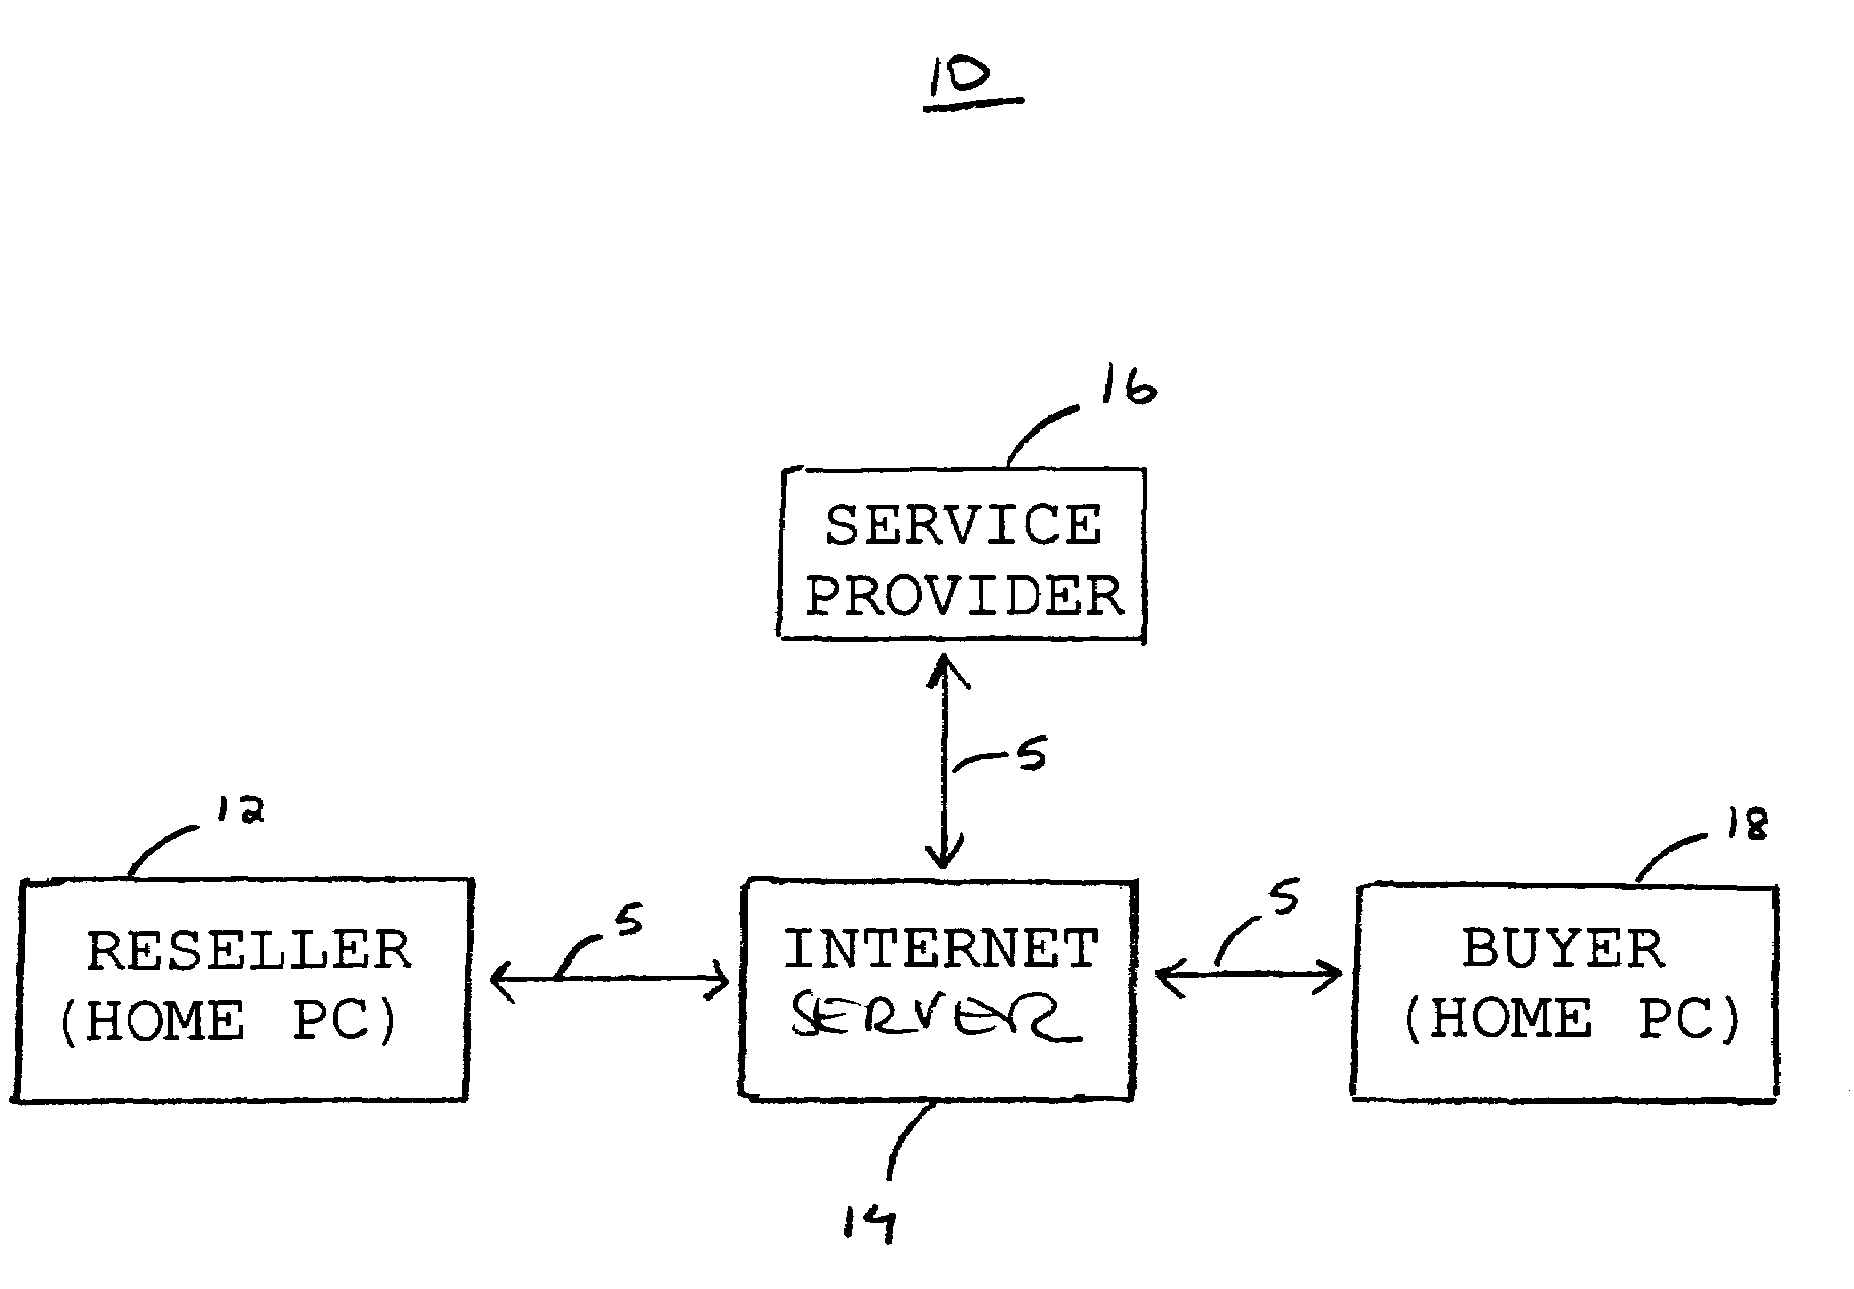 Systems and methods for reselling electronic merchandise